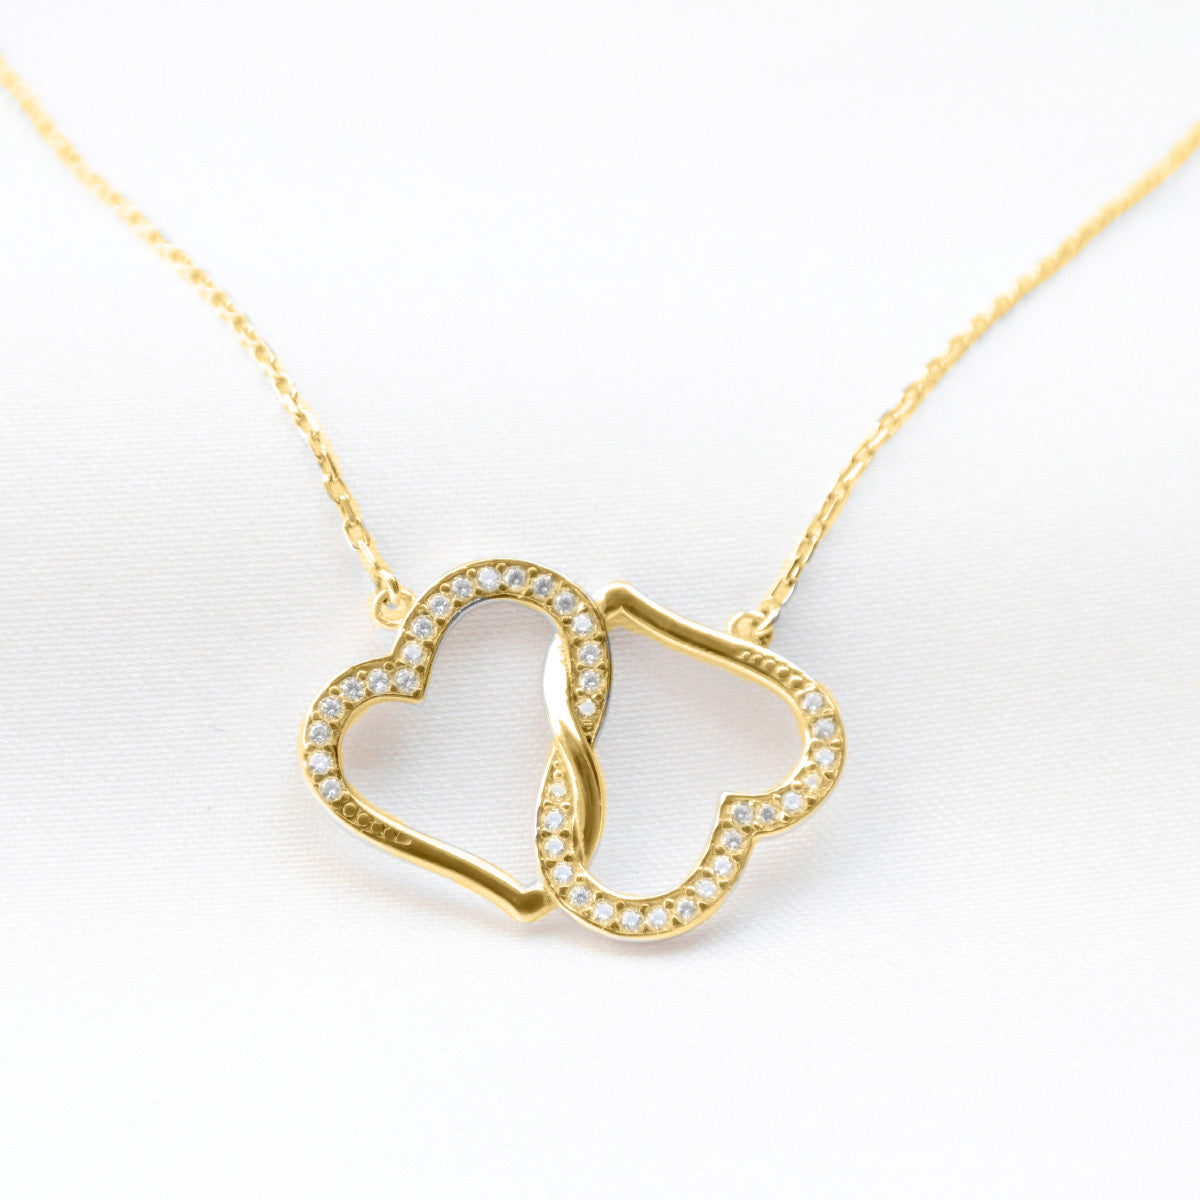 To My Daughter the Beauty, From Mom - Joined Hearts Gold Necklace Gift Set